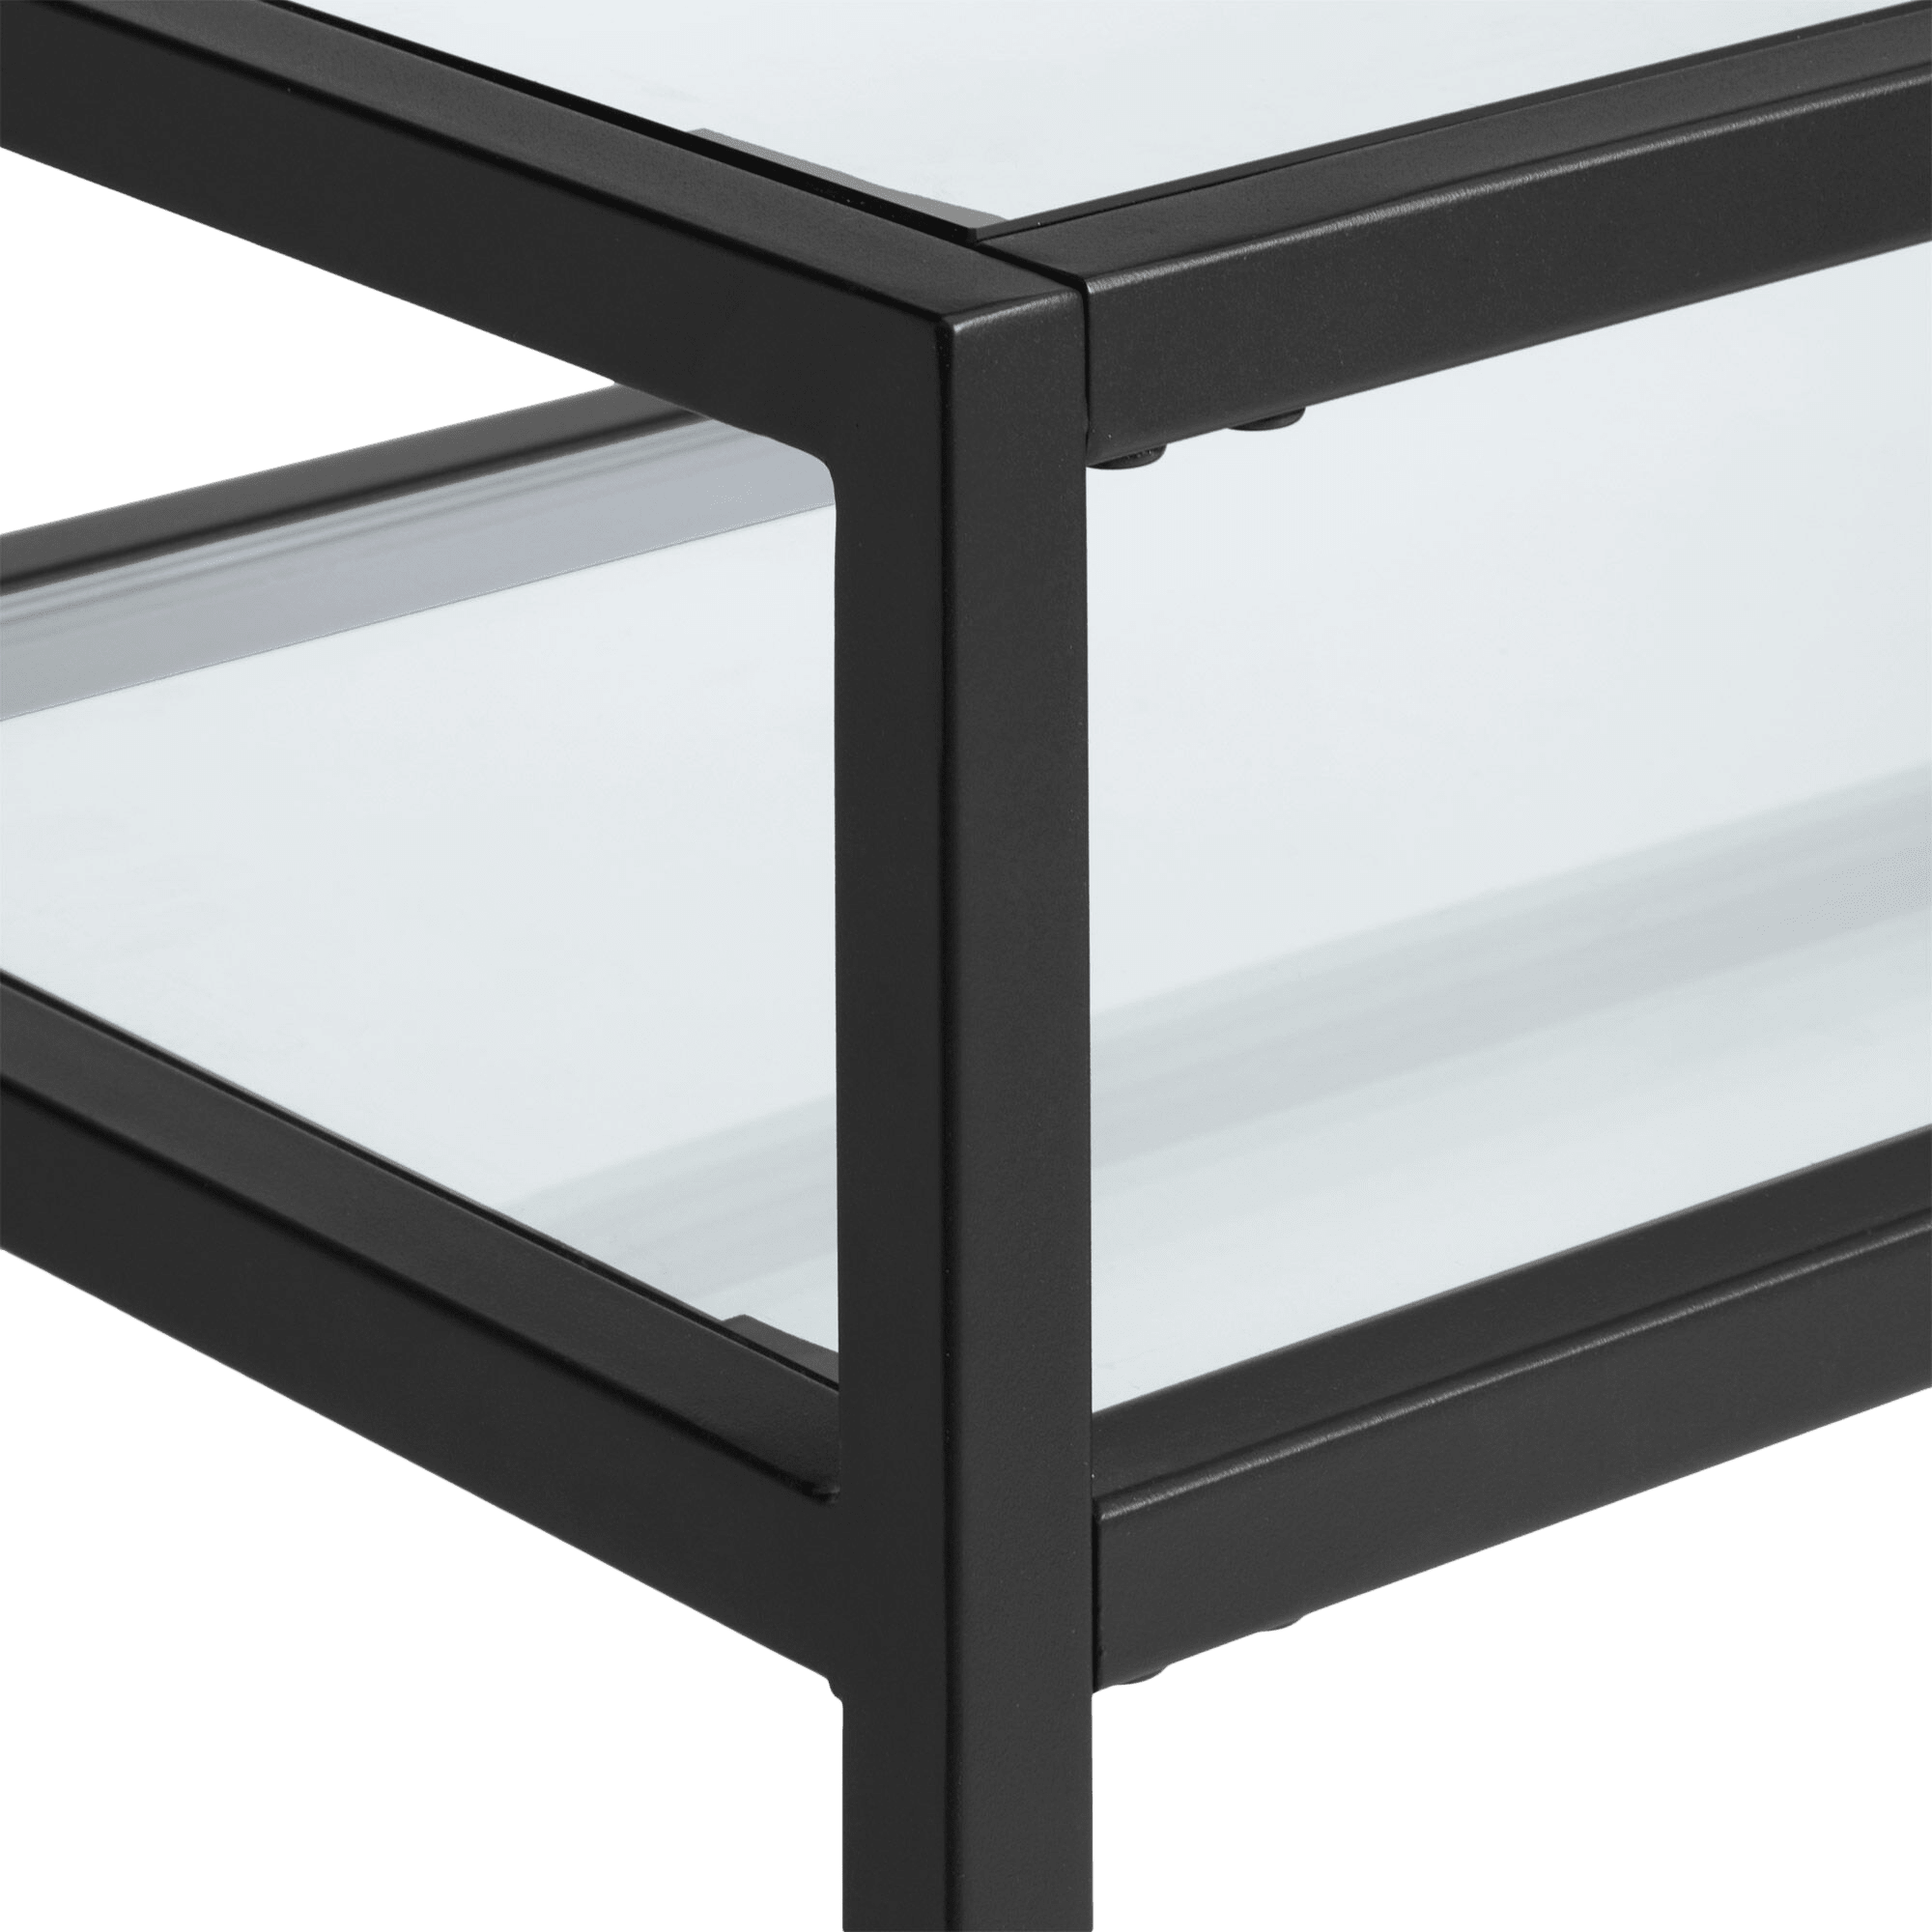 2-Shelf Tempered Glass and Metal Console Table